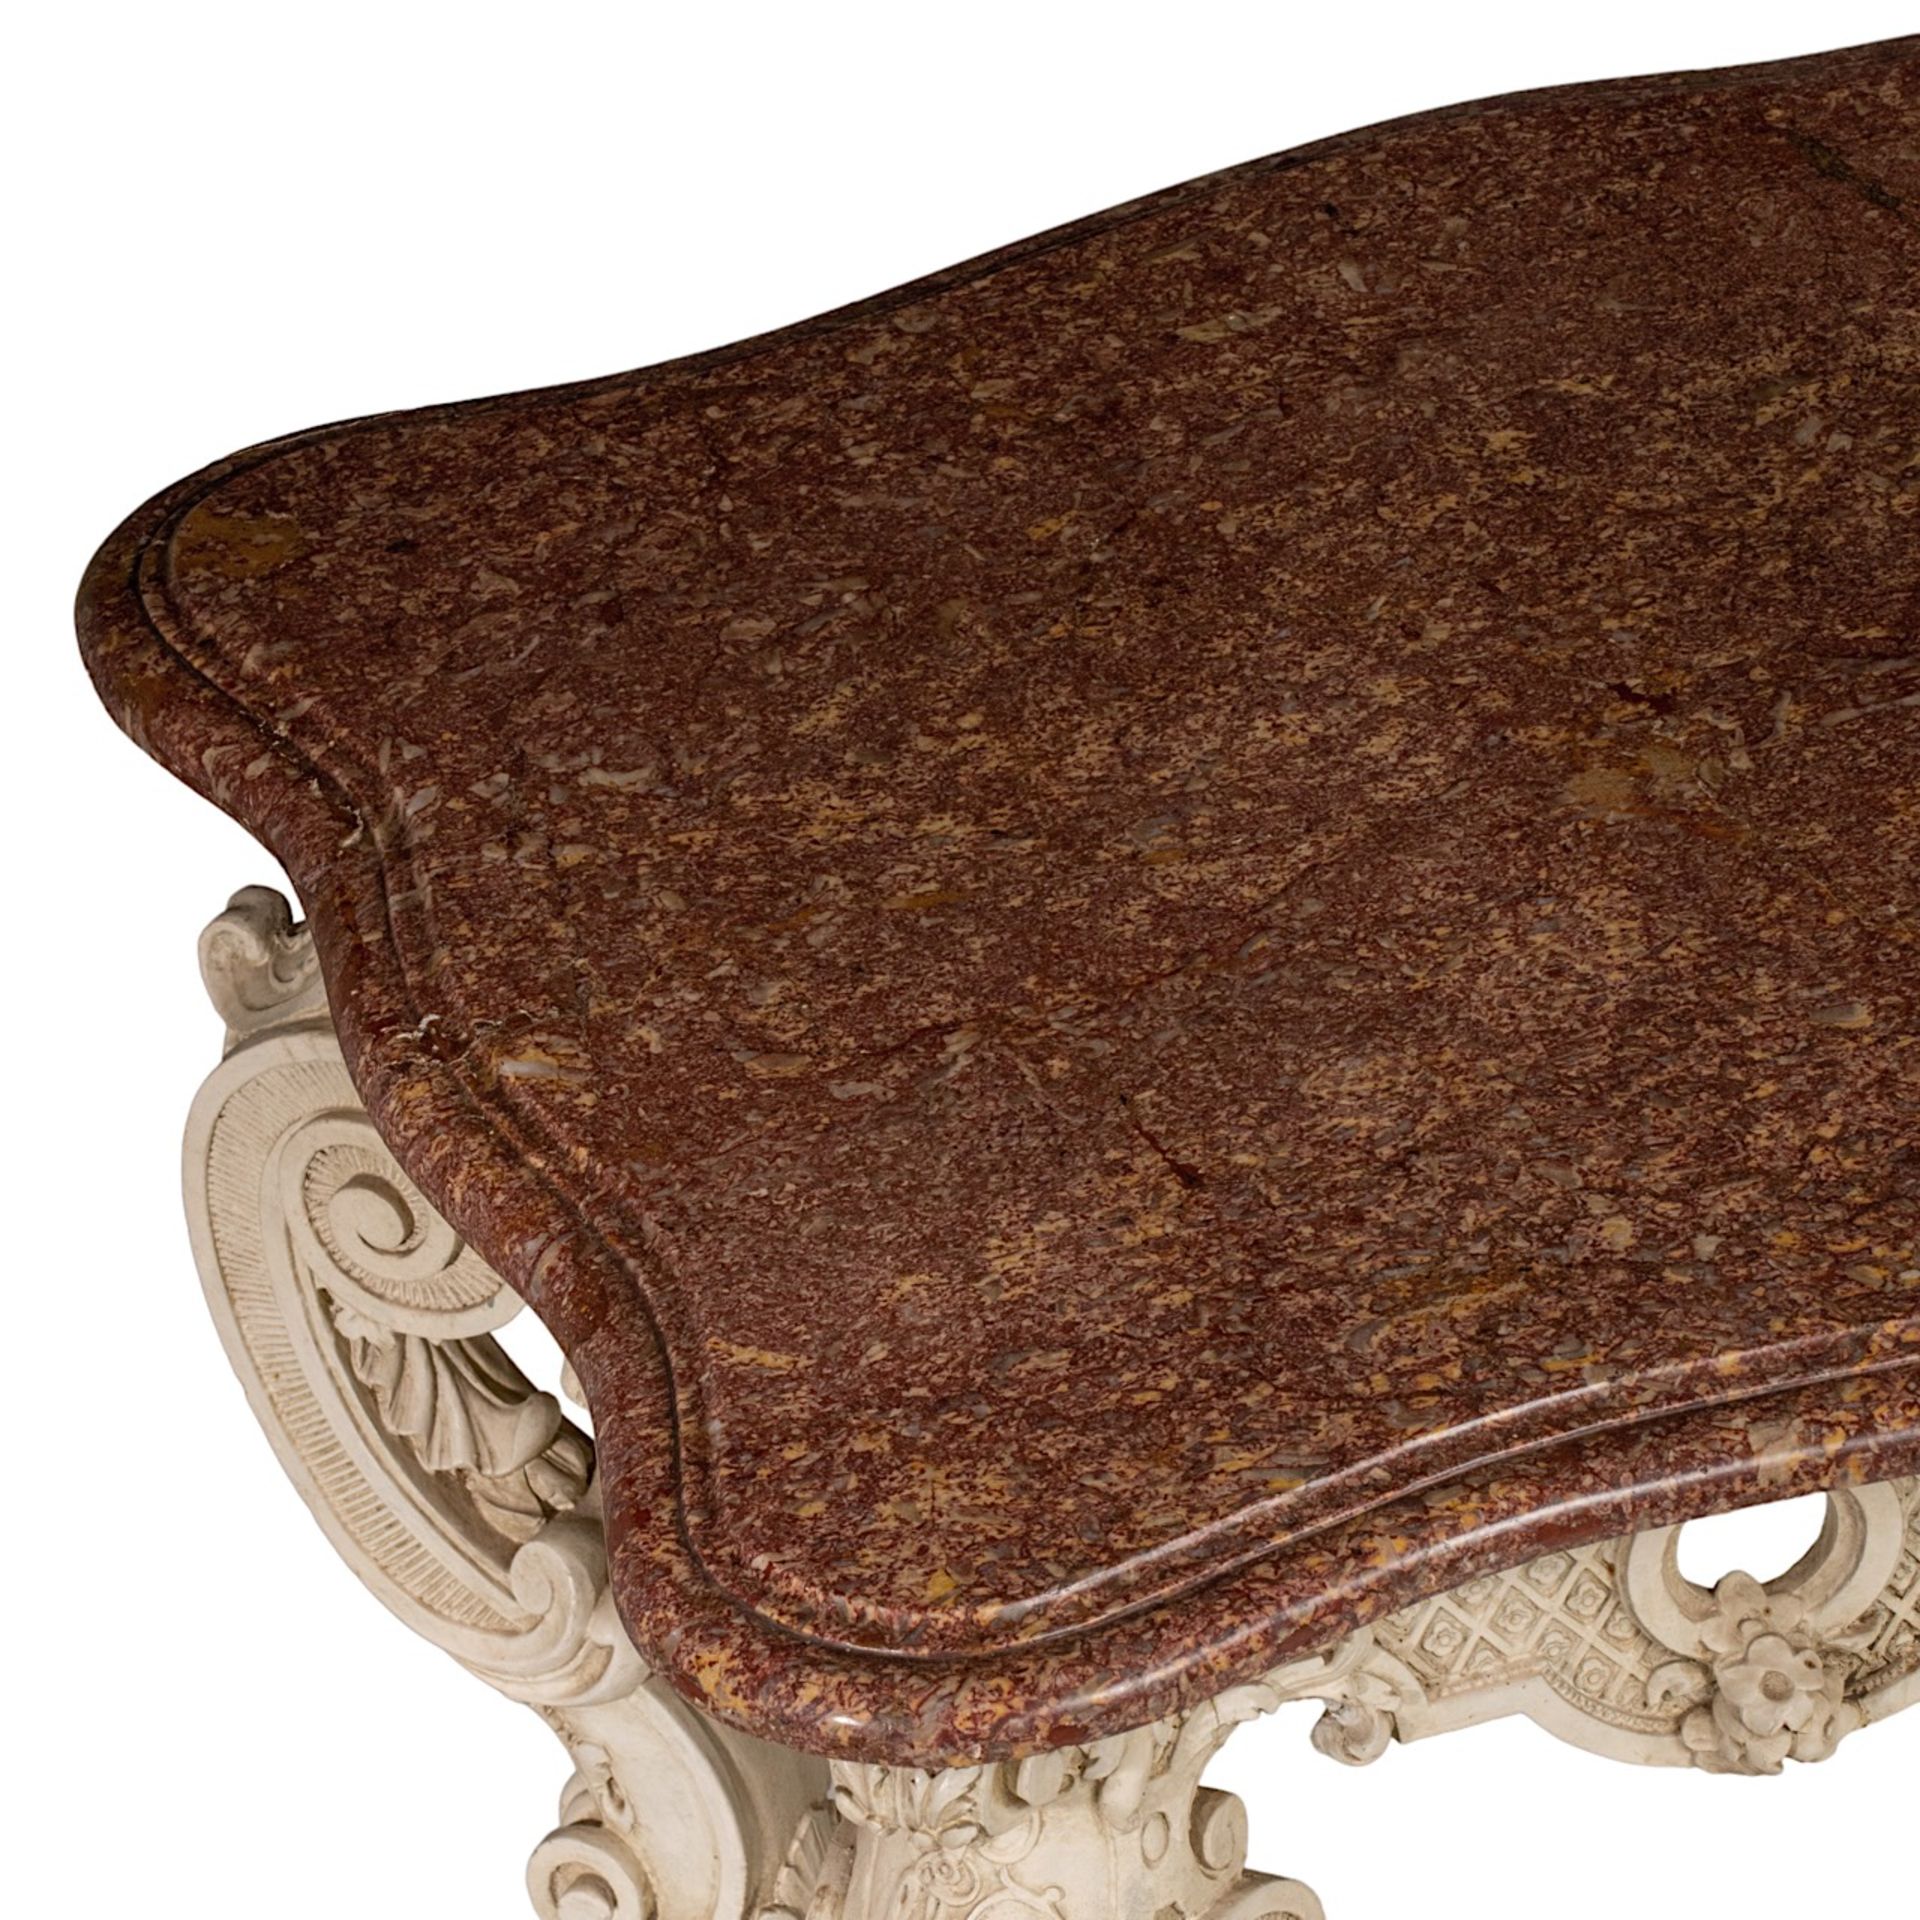 An imposing Louis XIV-style 'console de milieu' with a brocatelle marble, 19thC, H 81,5 - W 147 - D - Image 9 of 11